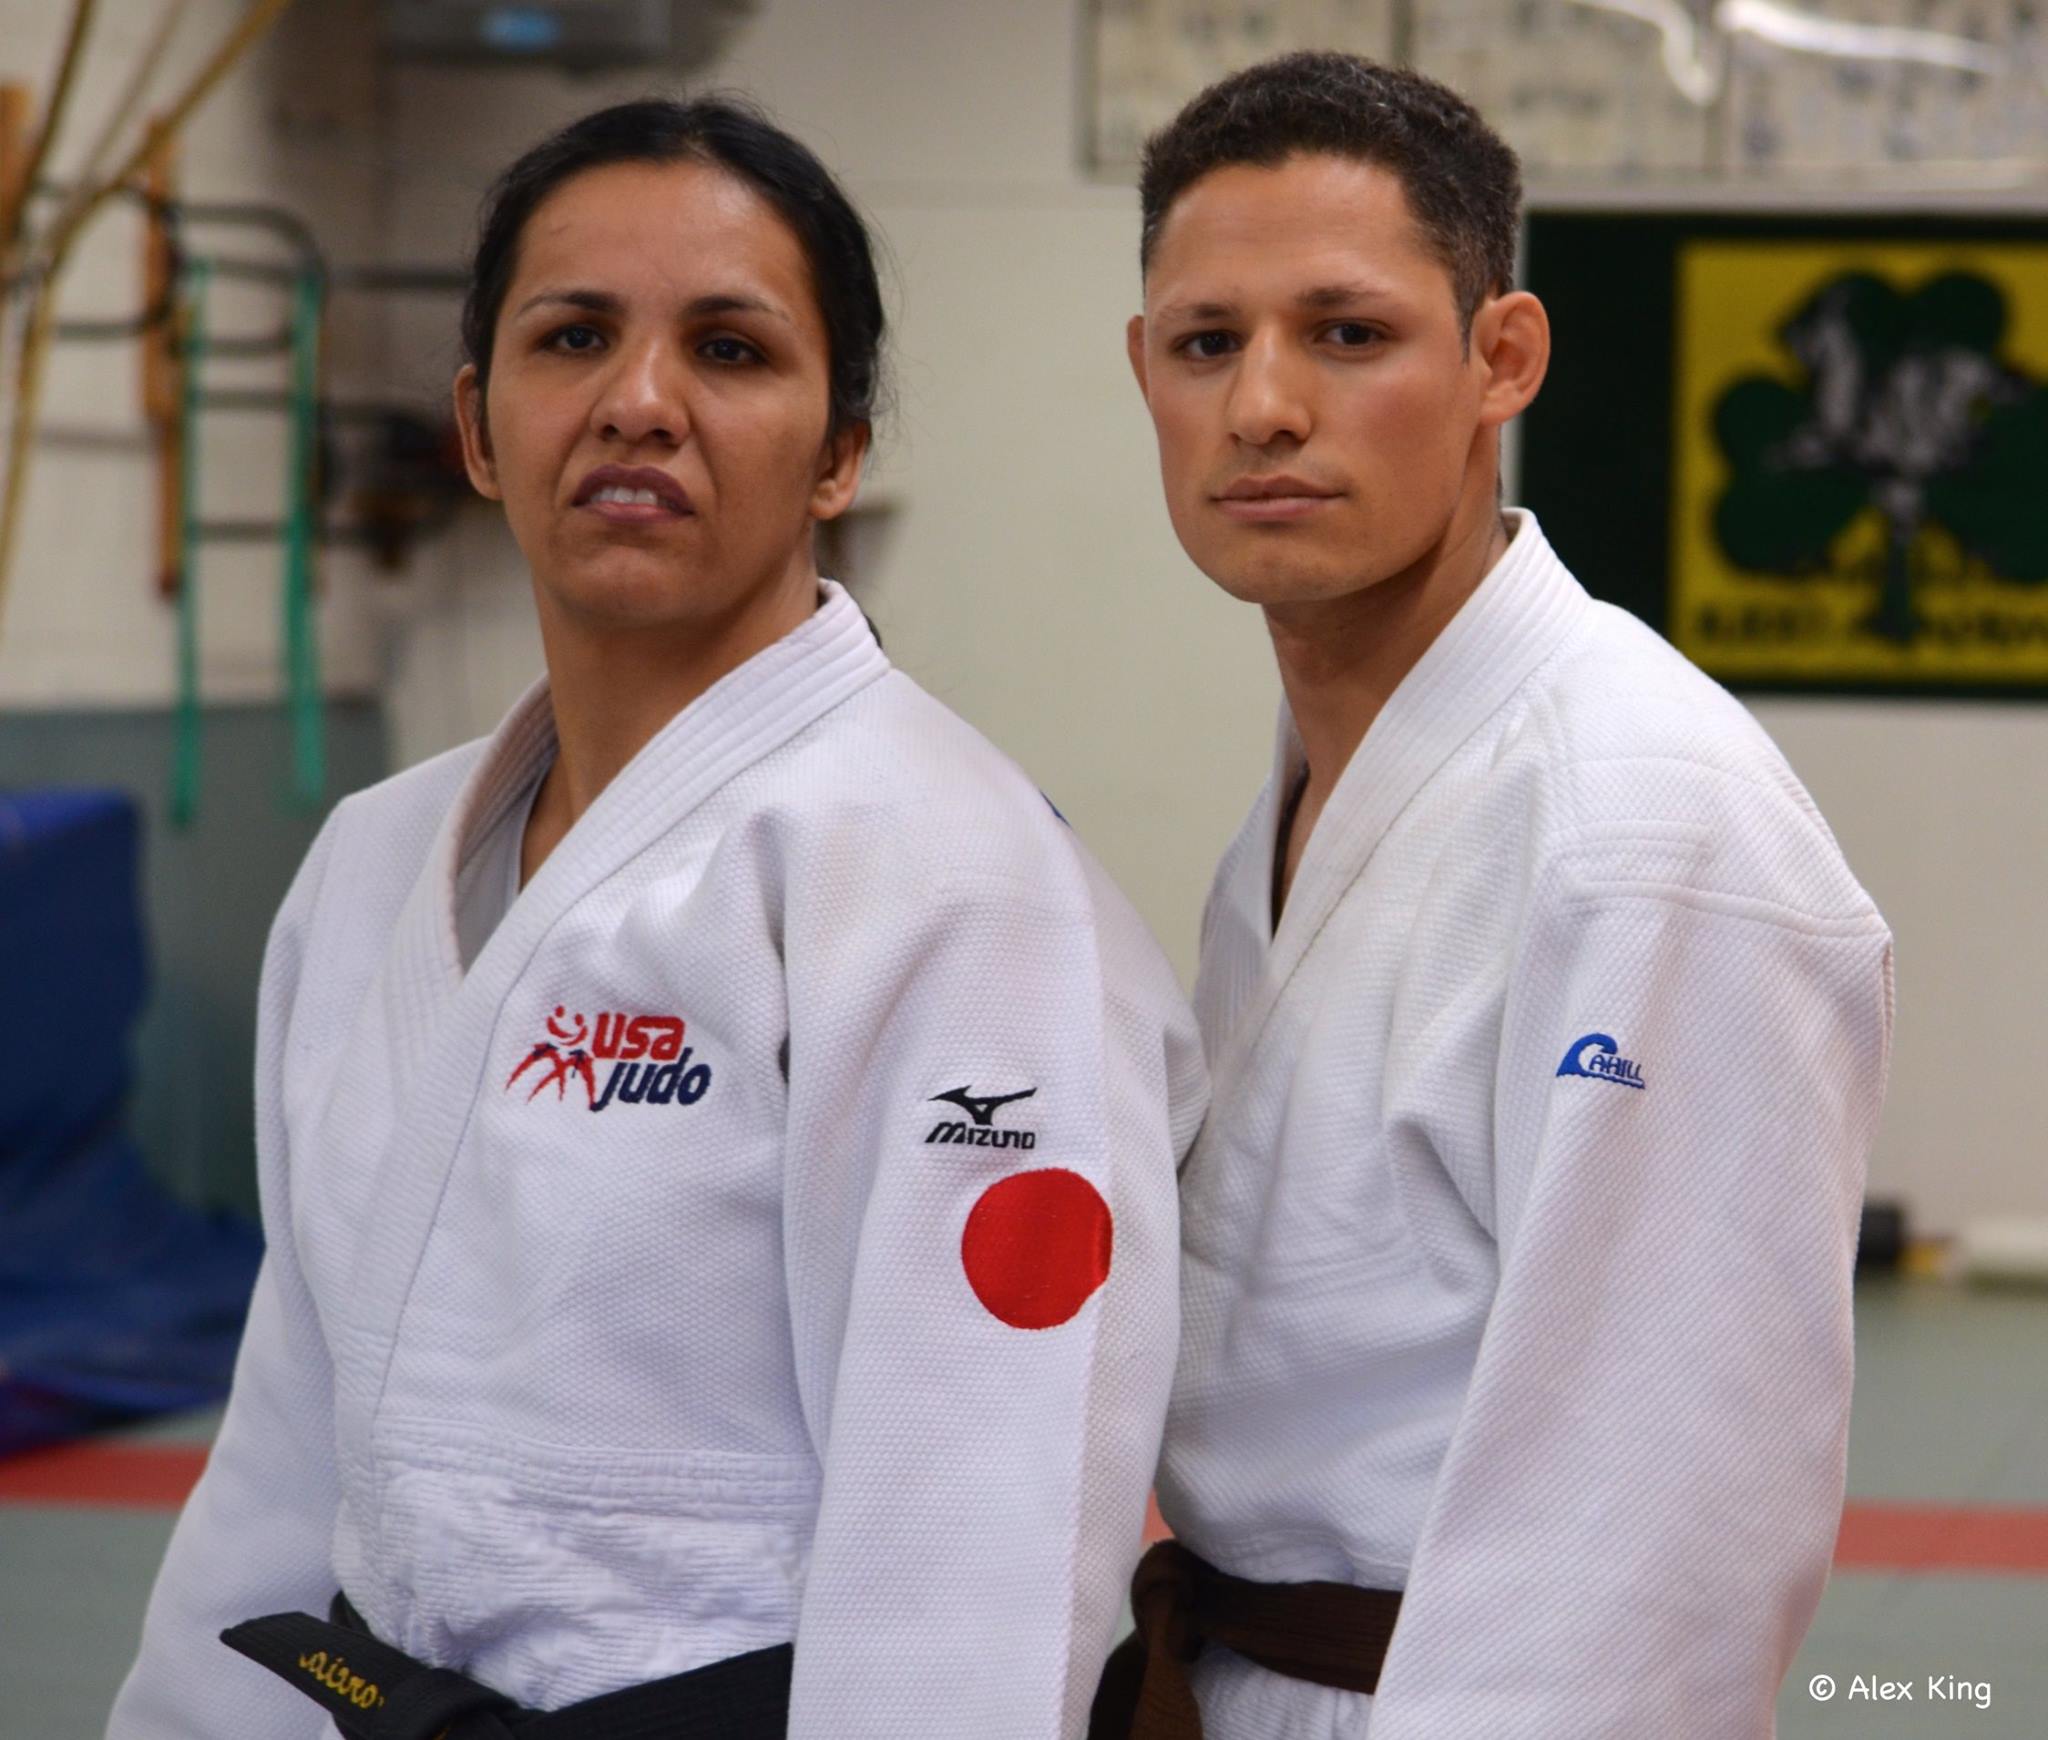 Christella Garcia Working Out With Alex King (Sighted Judoka) Who Takes Falls for Christella during training sessions at Cahill's Judo Academy.